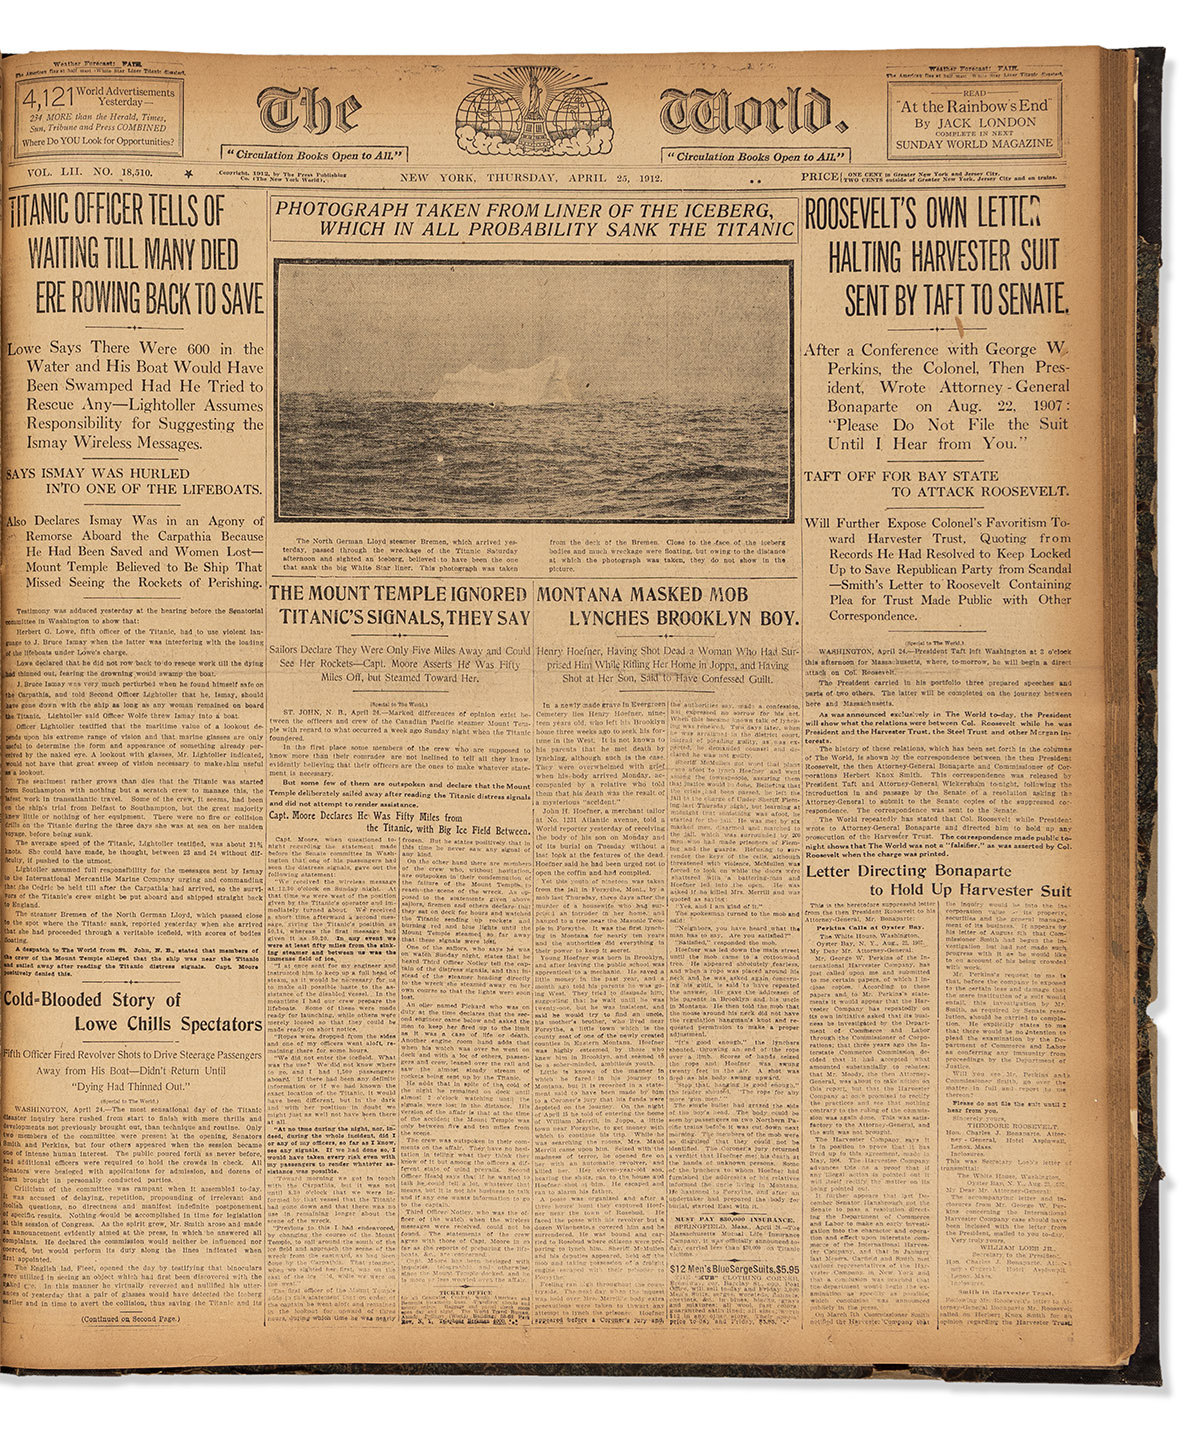 (MARITIME.) Volume of the New York World covering the Titanic disaster.